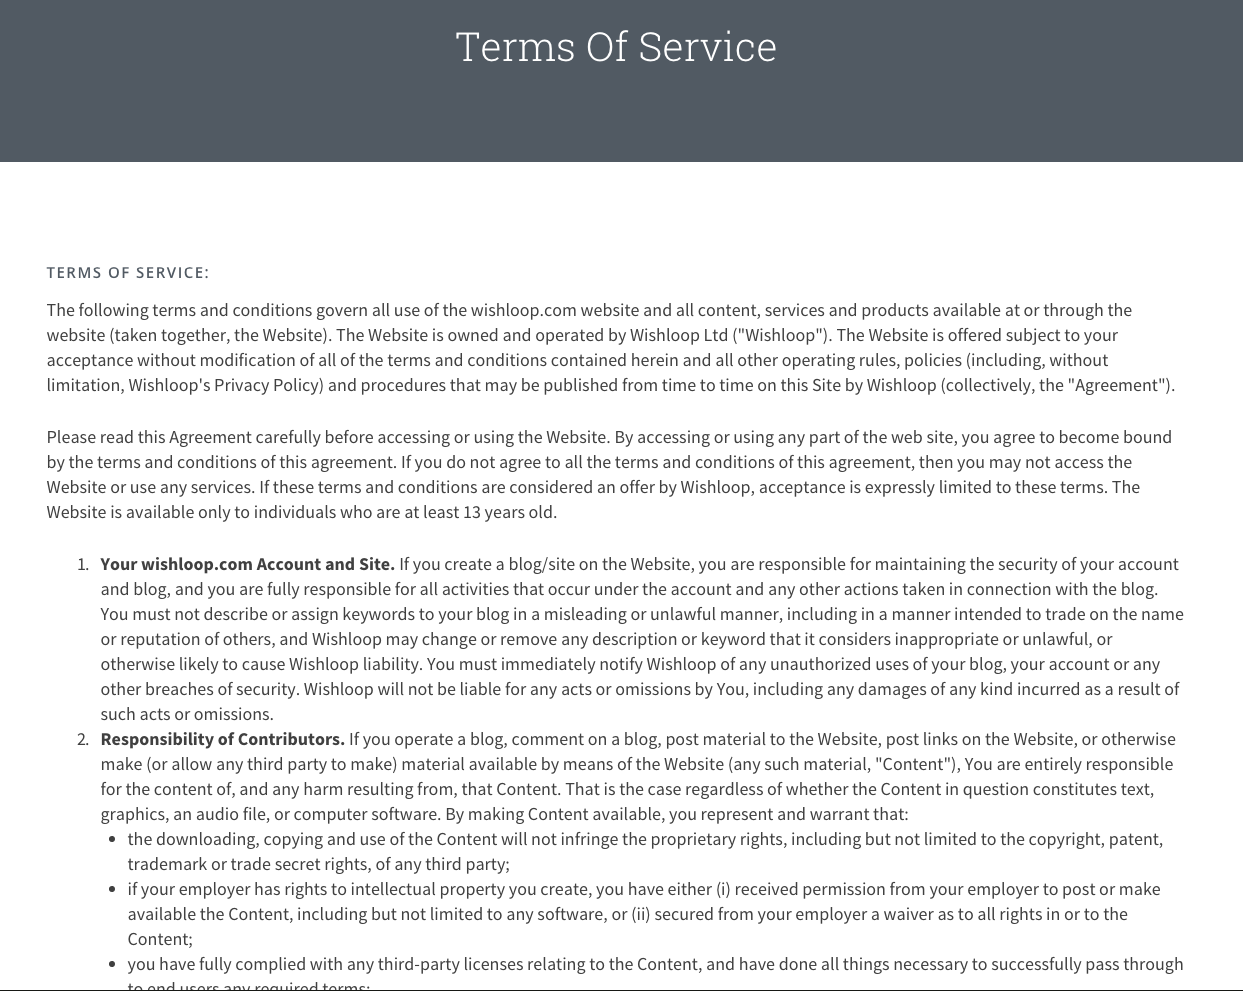 "Terms Of Service" shortcode executed